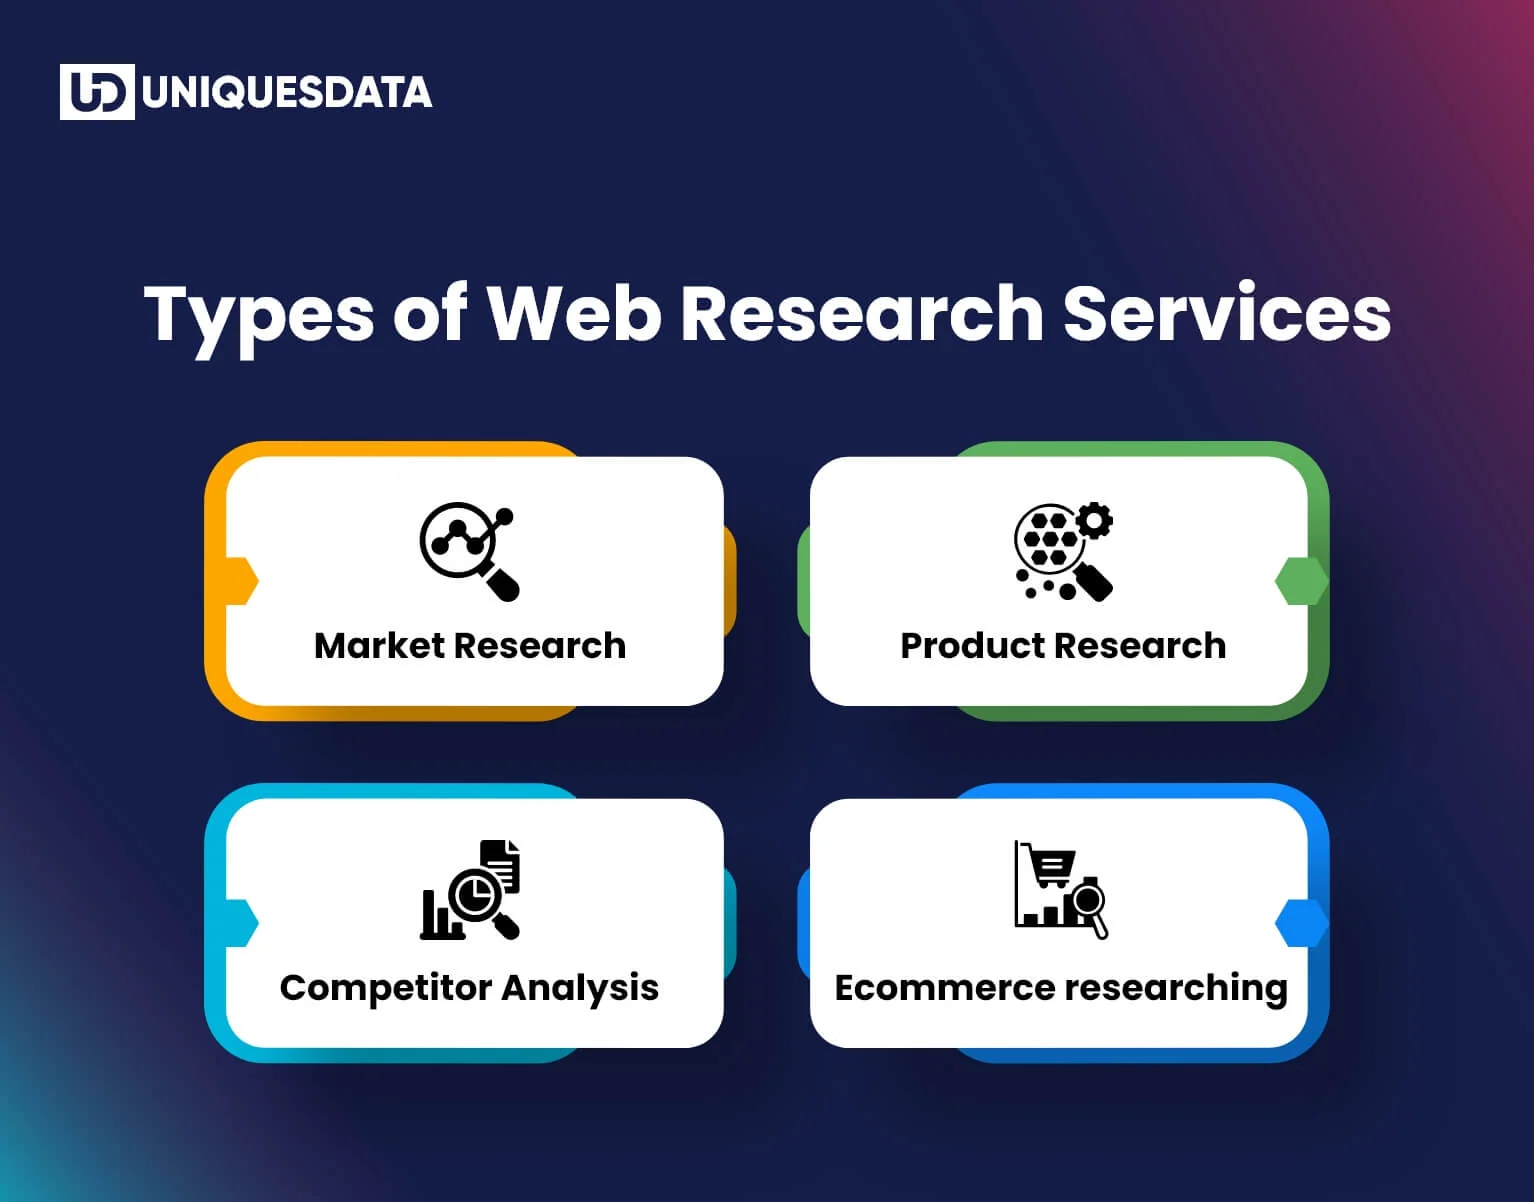 Types of Web Research Services